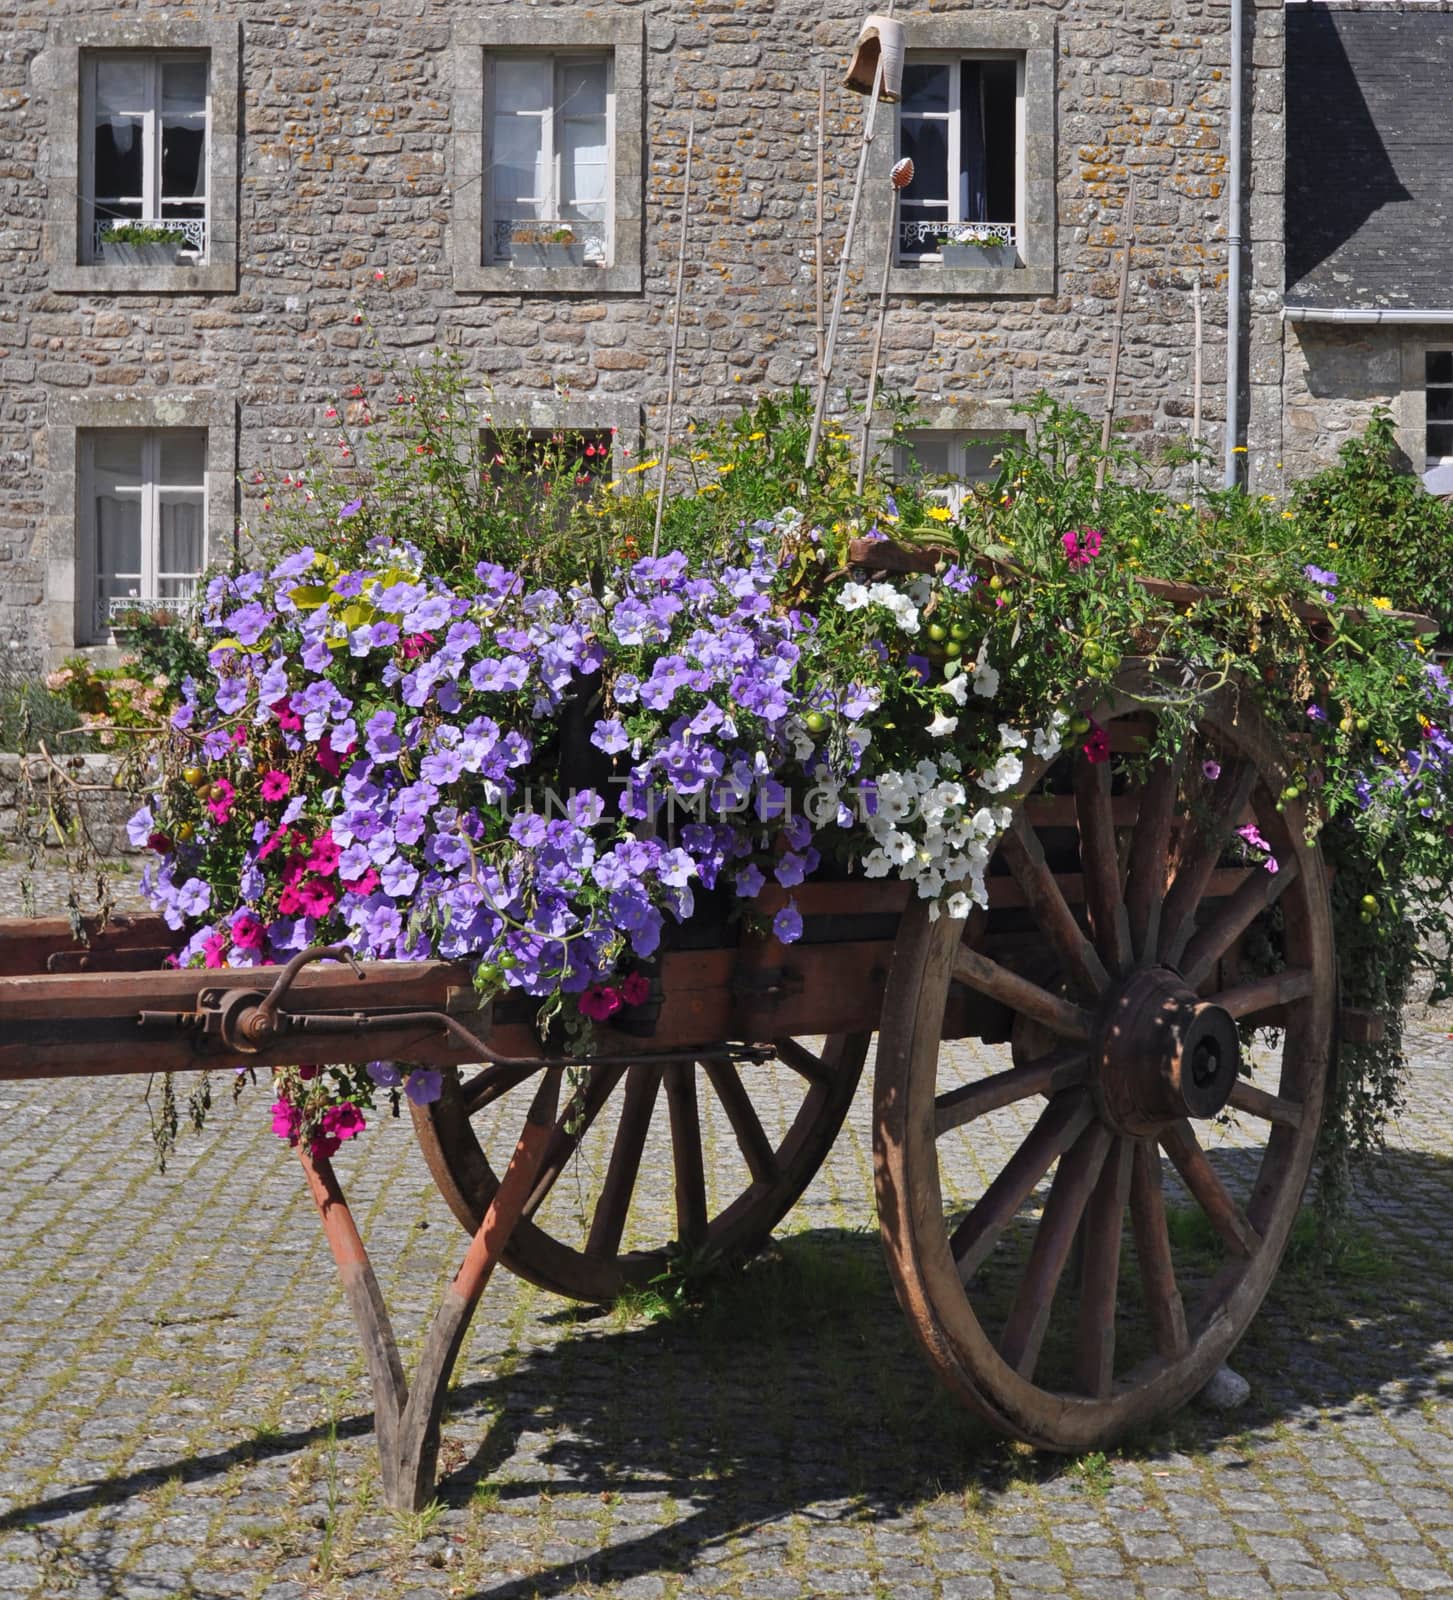 Floral display in an old wooden cart, in the village of Locronan, in Brittany, rural France